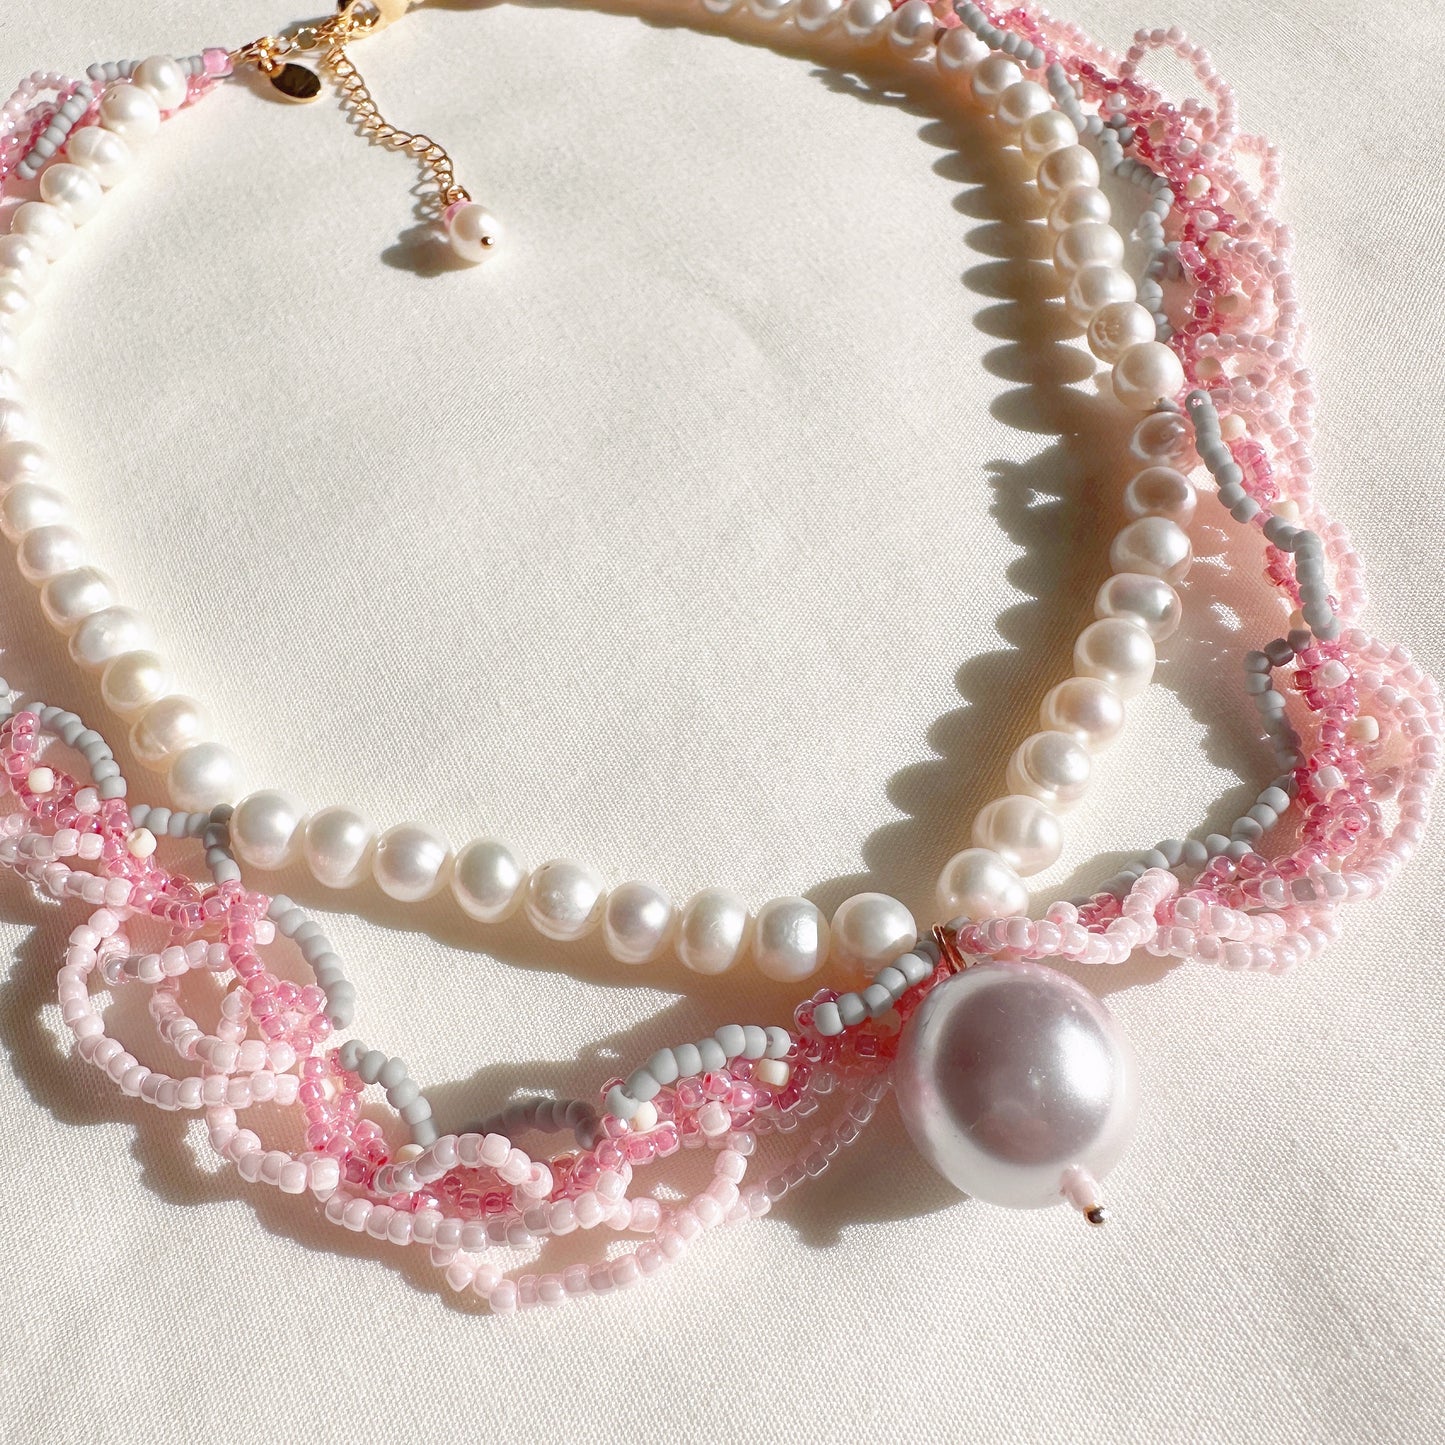 J'adore...Pink bouquet lace beaded necklace